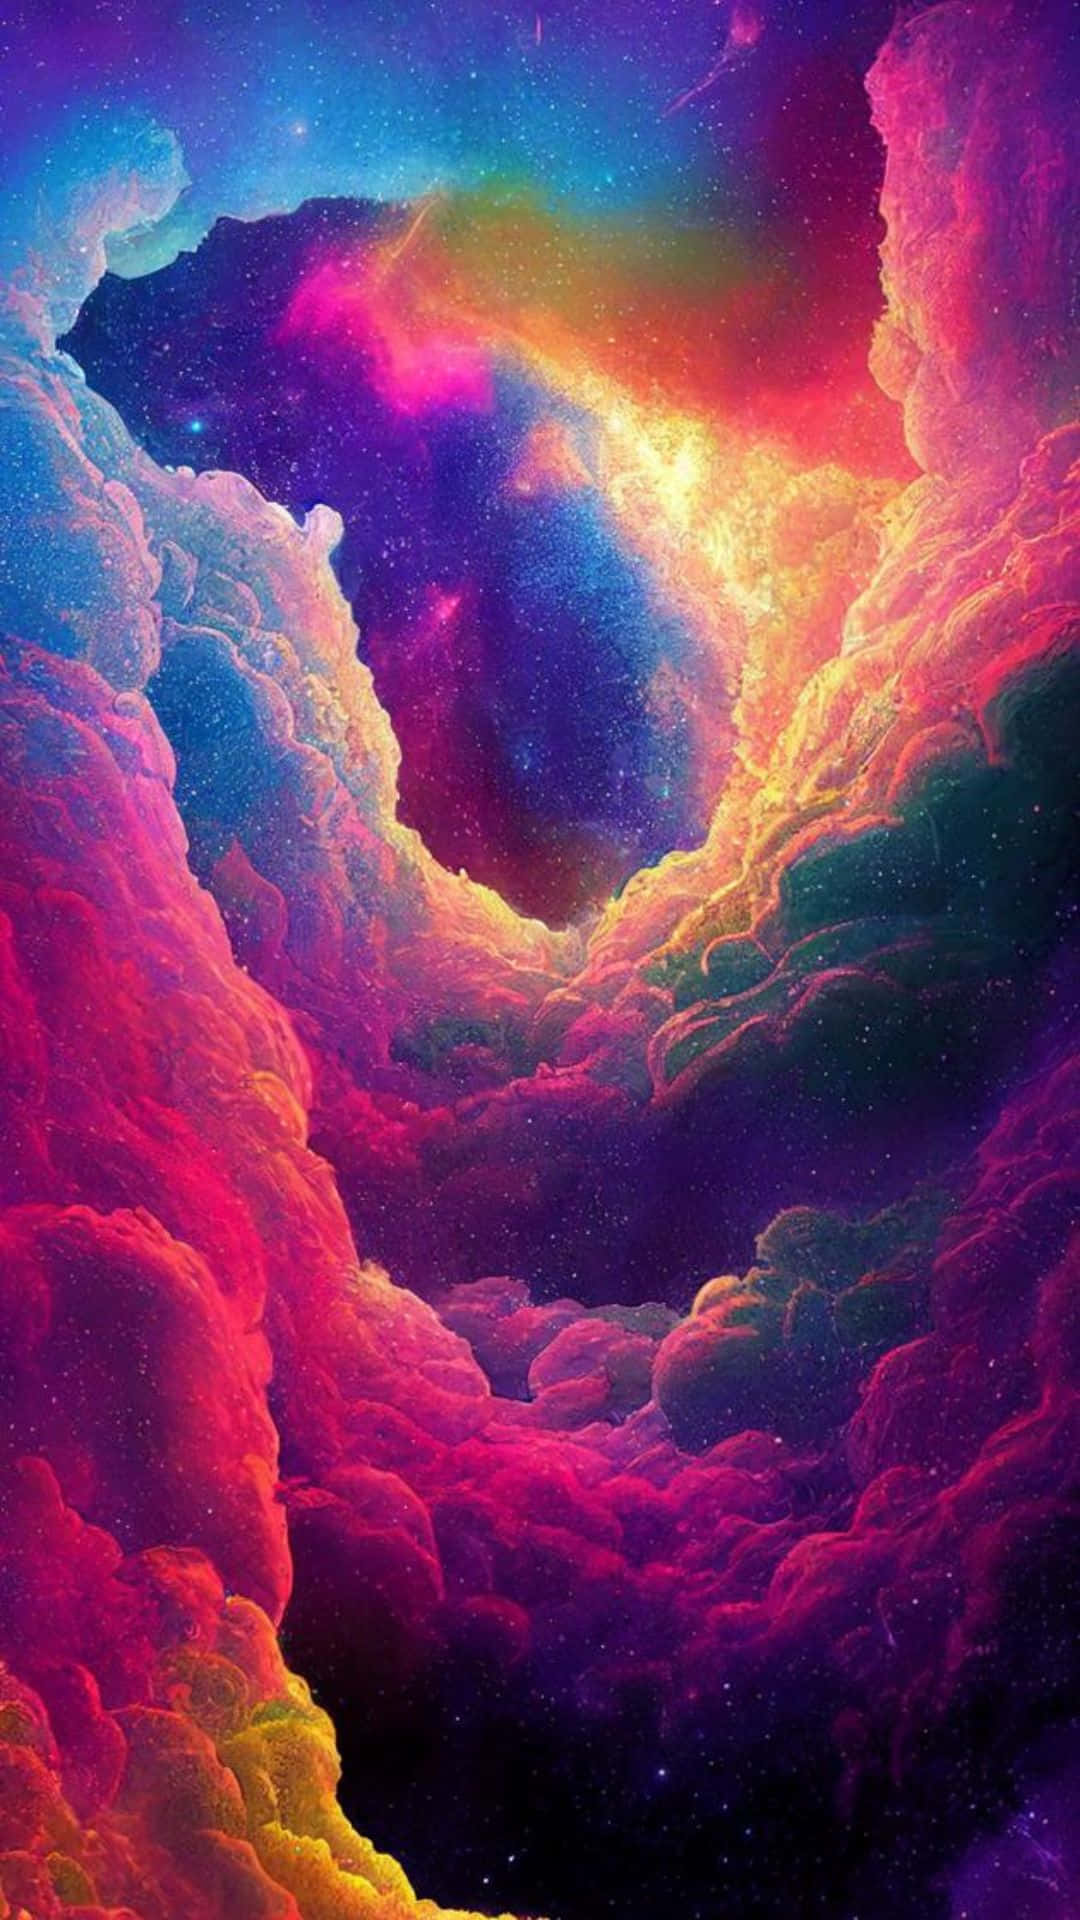 Otherworldly Skies - A Colorful Trippy Sky Adventure Wallpaper